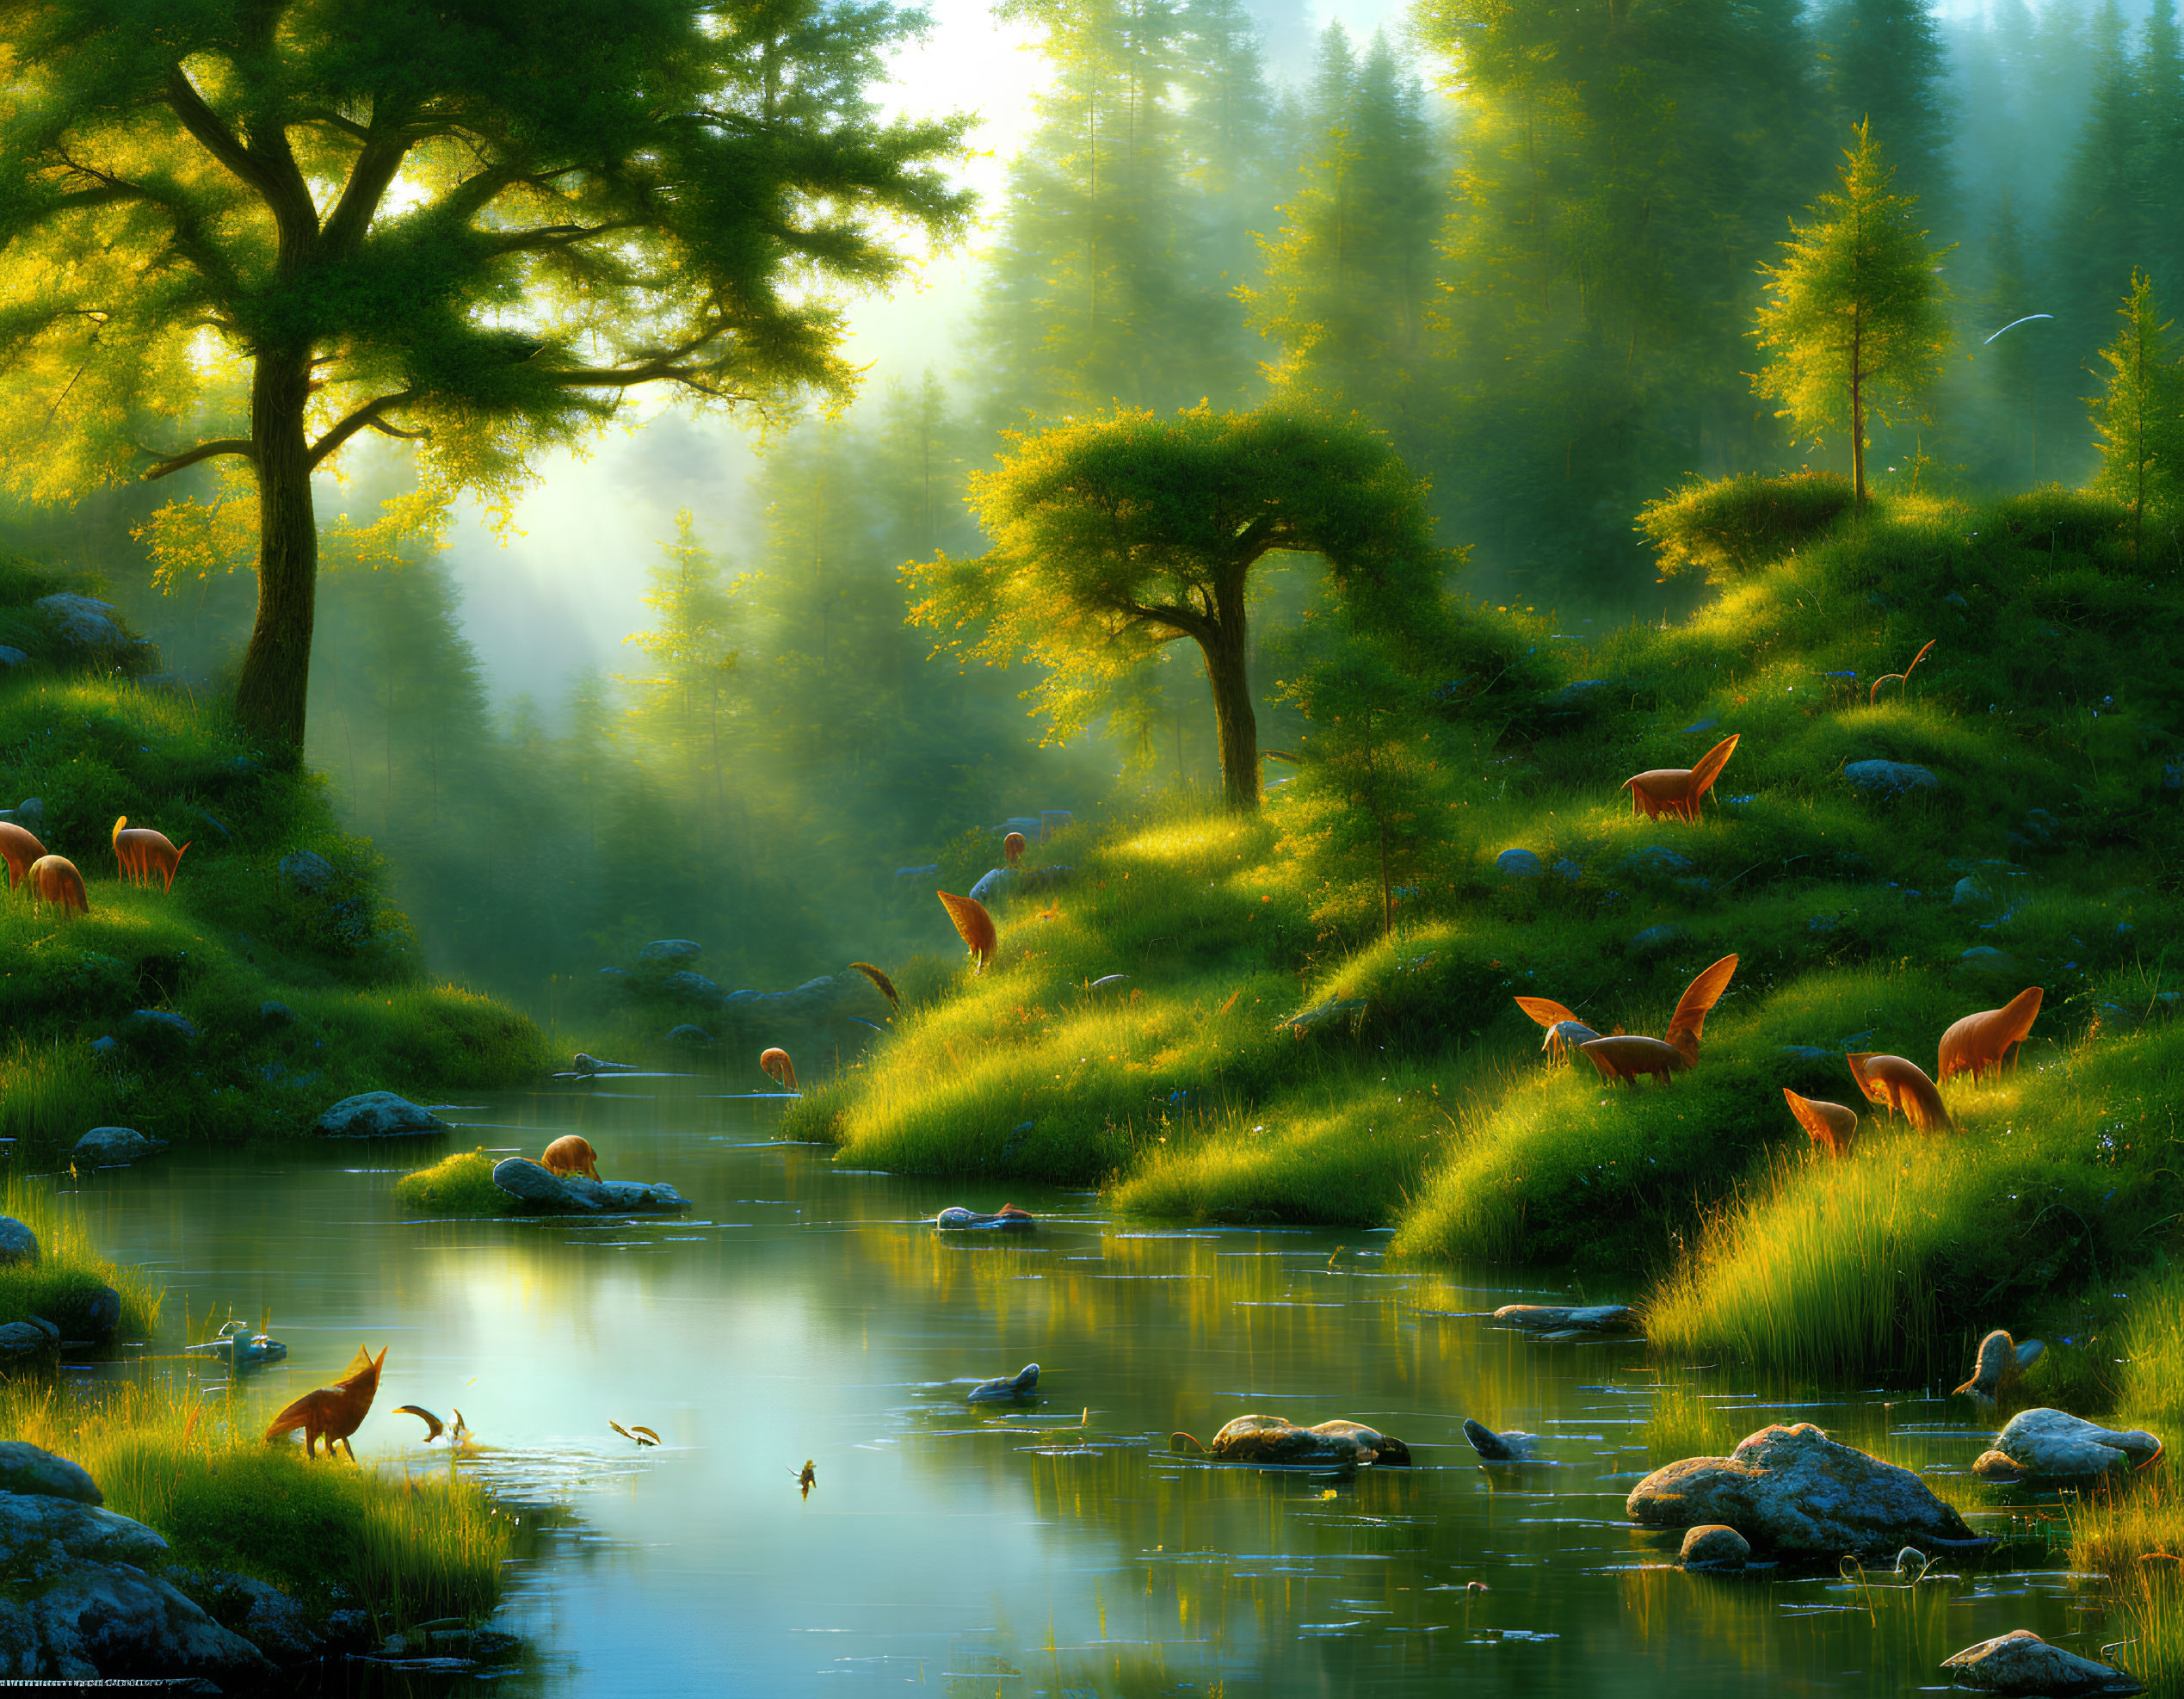 Tranquil forest scene with deer, fox, sunlit trees, mist, and stream